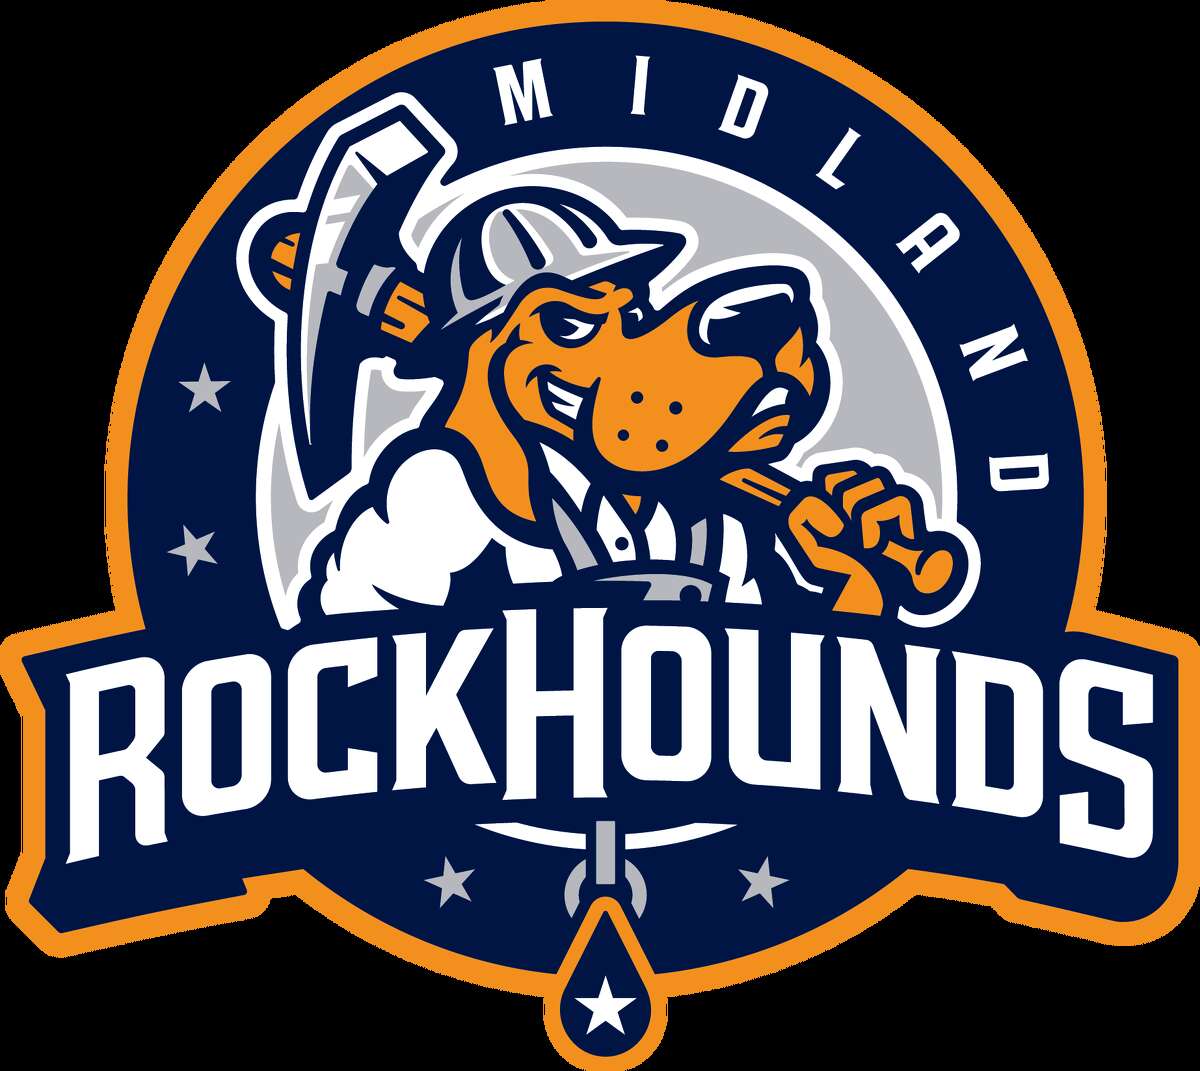 Midland RockHounds logo that was unveiled before the 2022 season. 